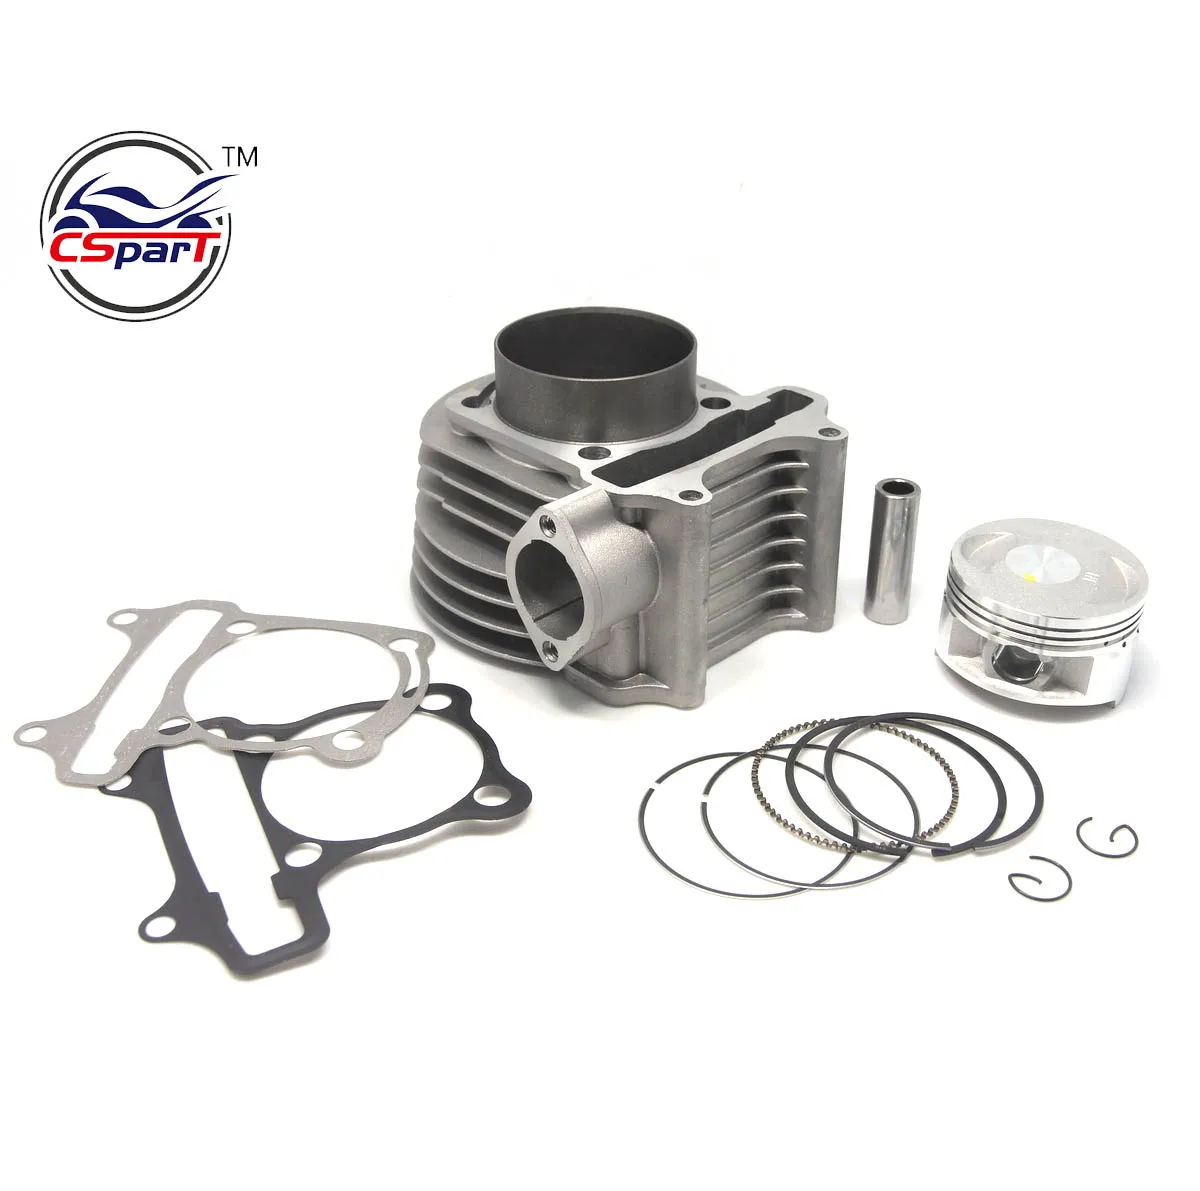 GY6 Big Bore Cylinder 62mm Kit High Performance Cylinder kit for GY6 125CC 150CC 